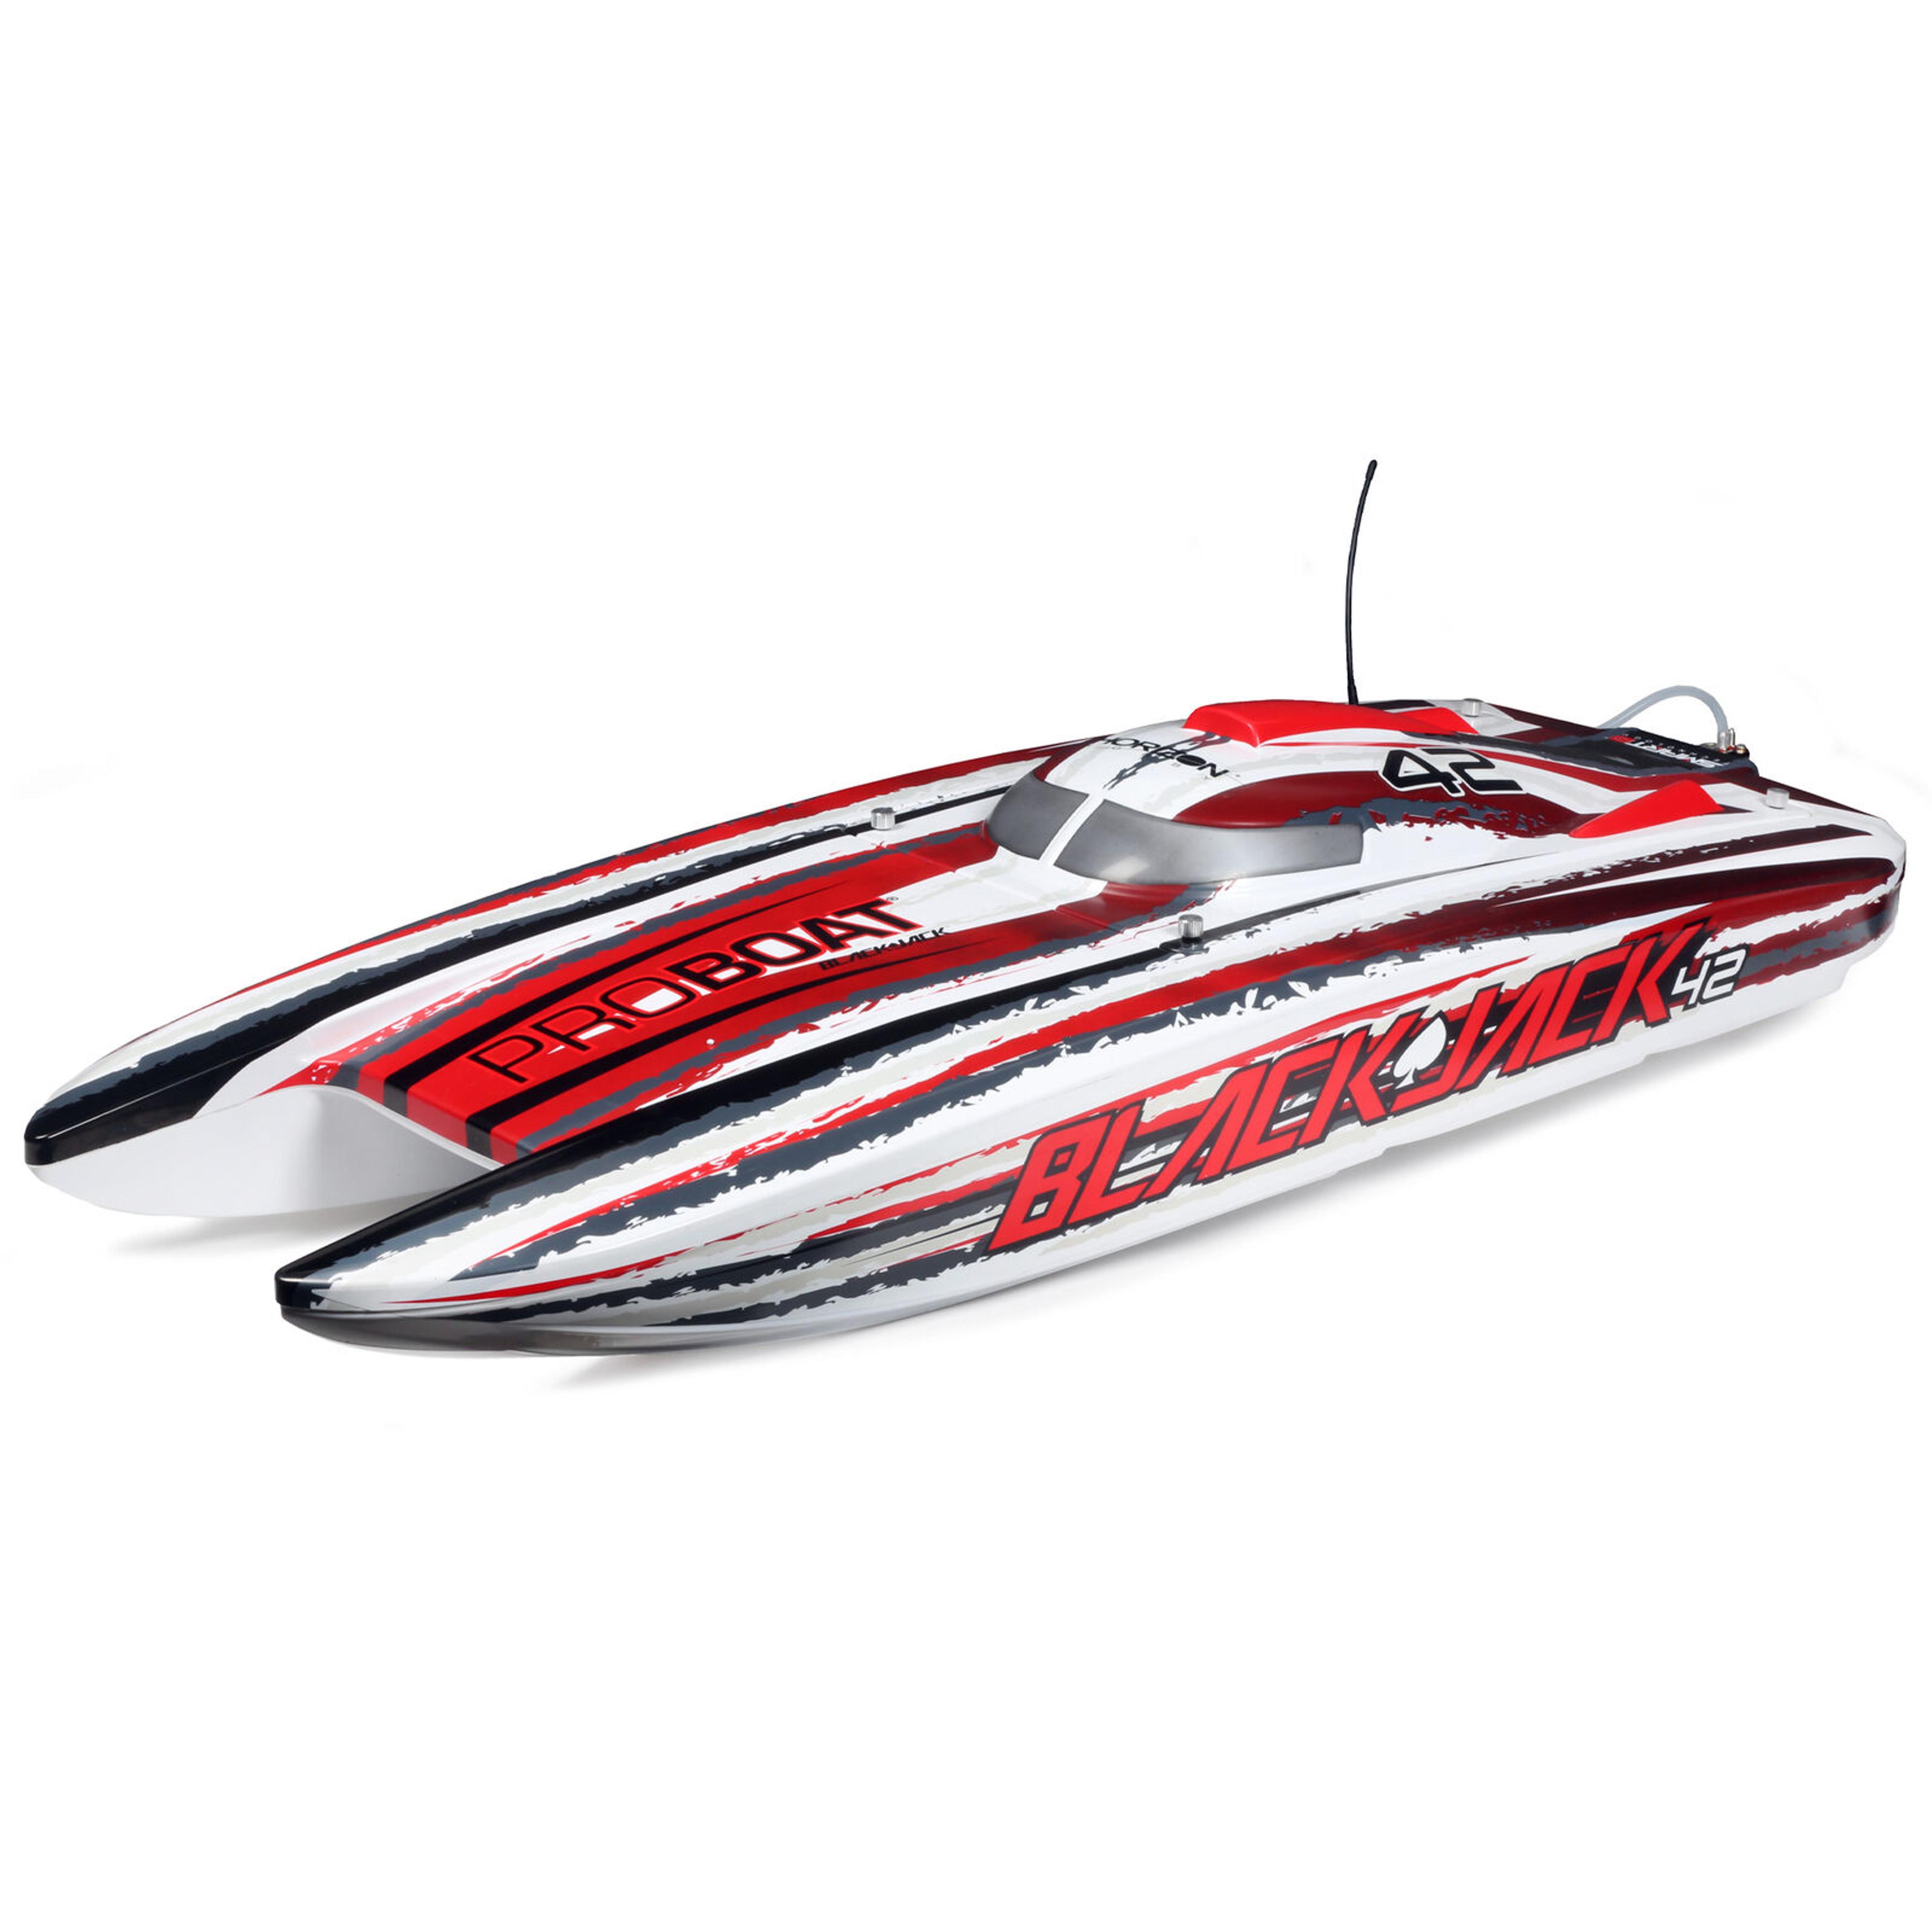 Pro Boat Blackjack 42in 8S Brushless Catamaran RTR RC Boat (White and Red)